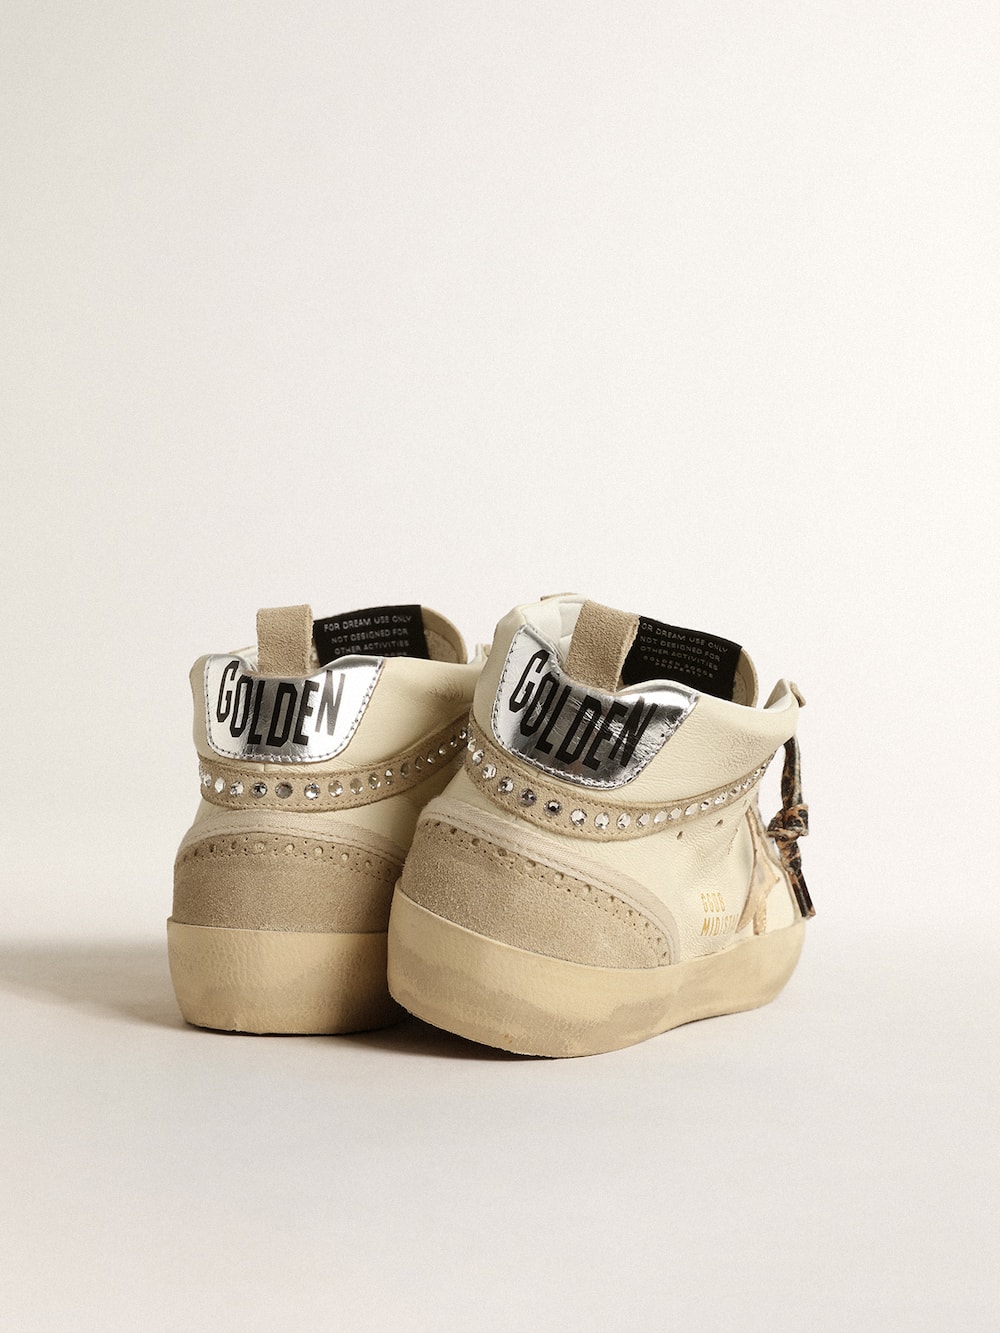 Golden Goose - Mid Star with metallic leather star and Swarovski crystal flash in 